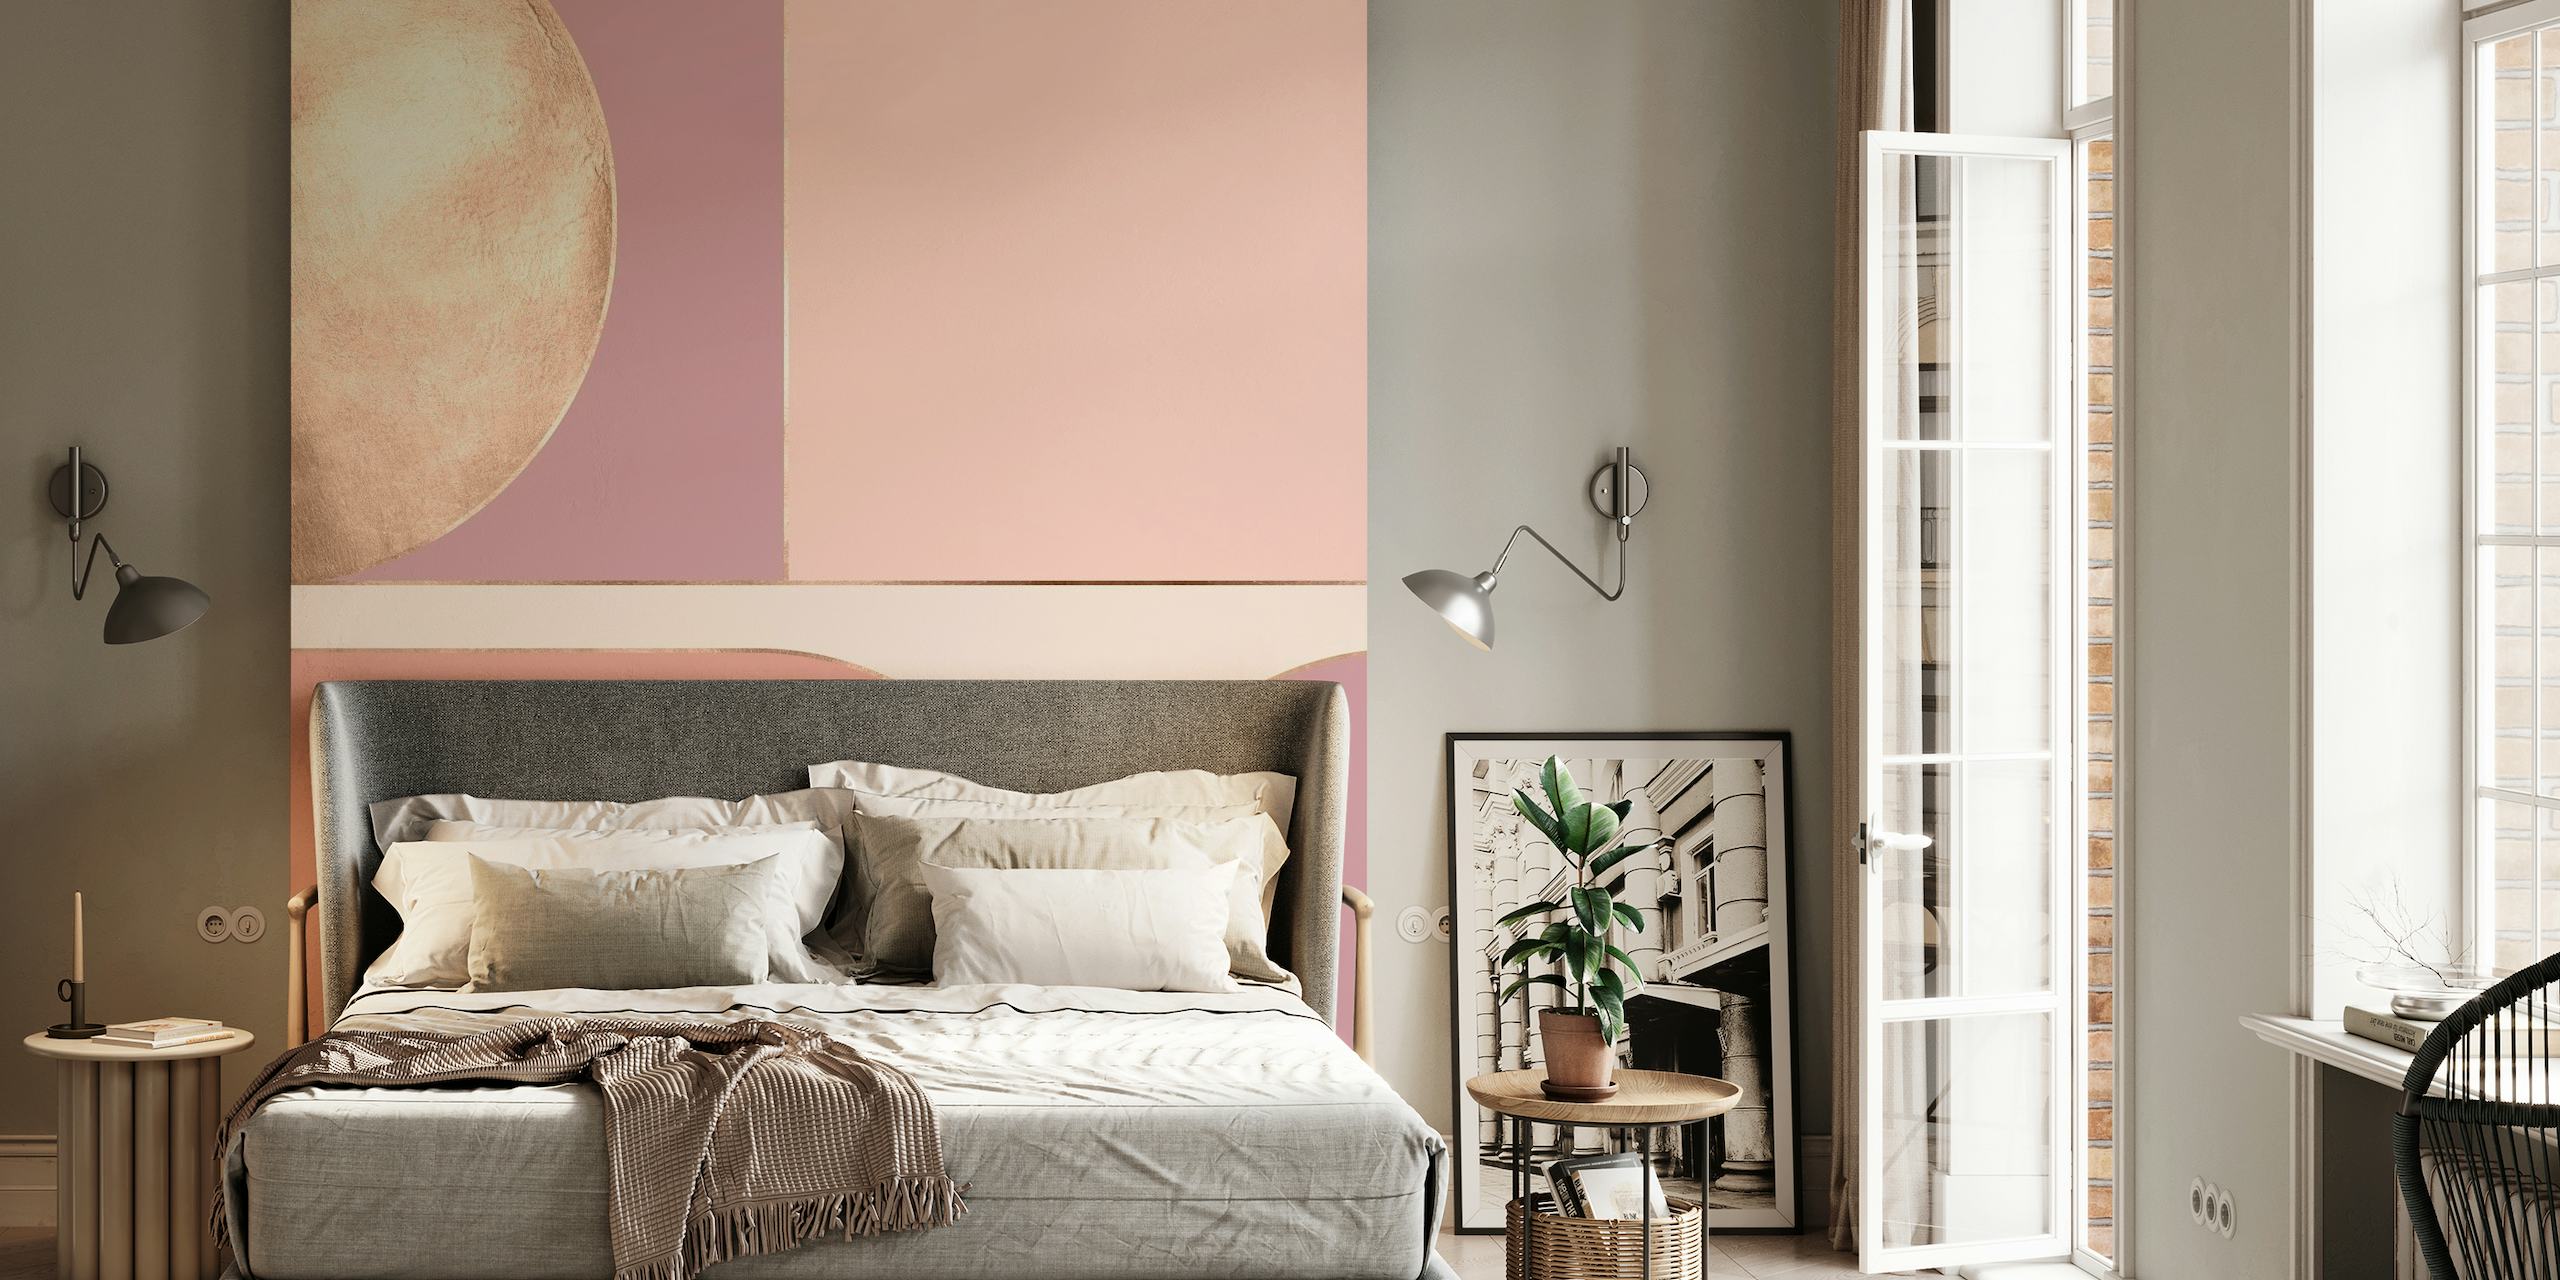 Geometric Athens II wall mural with abstract shapes and a modern pastel color scheme.